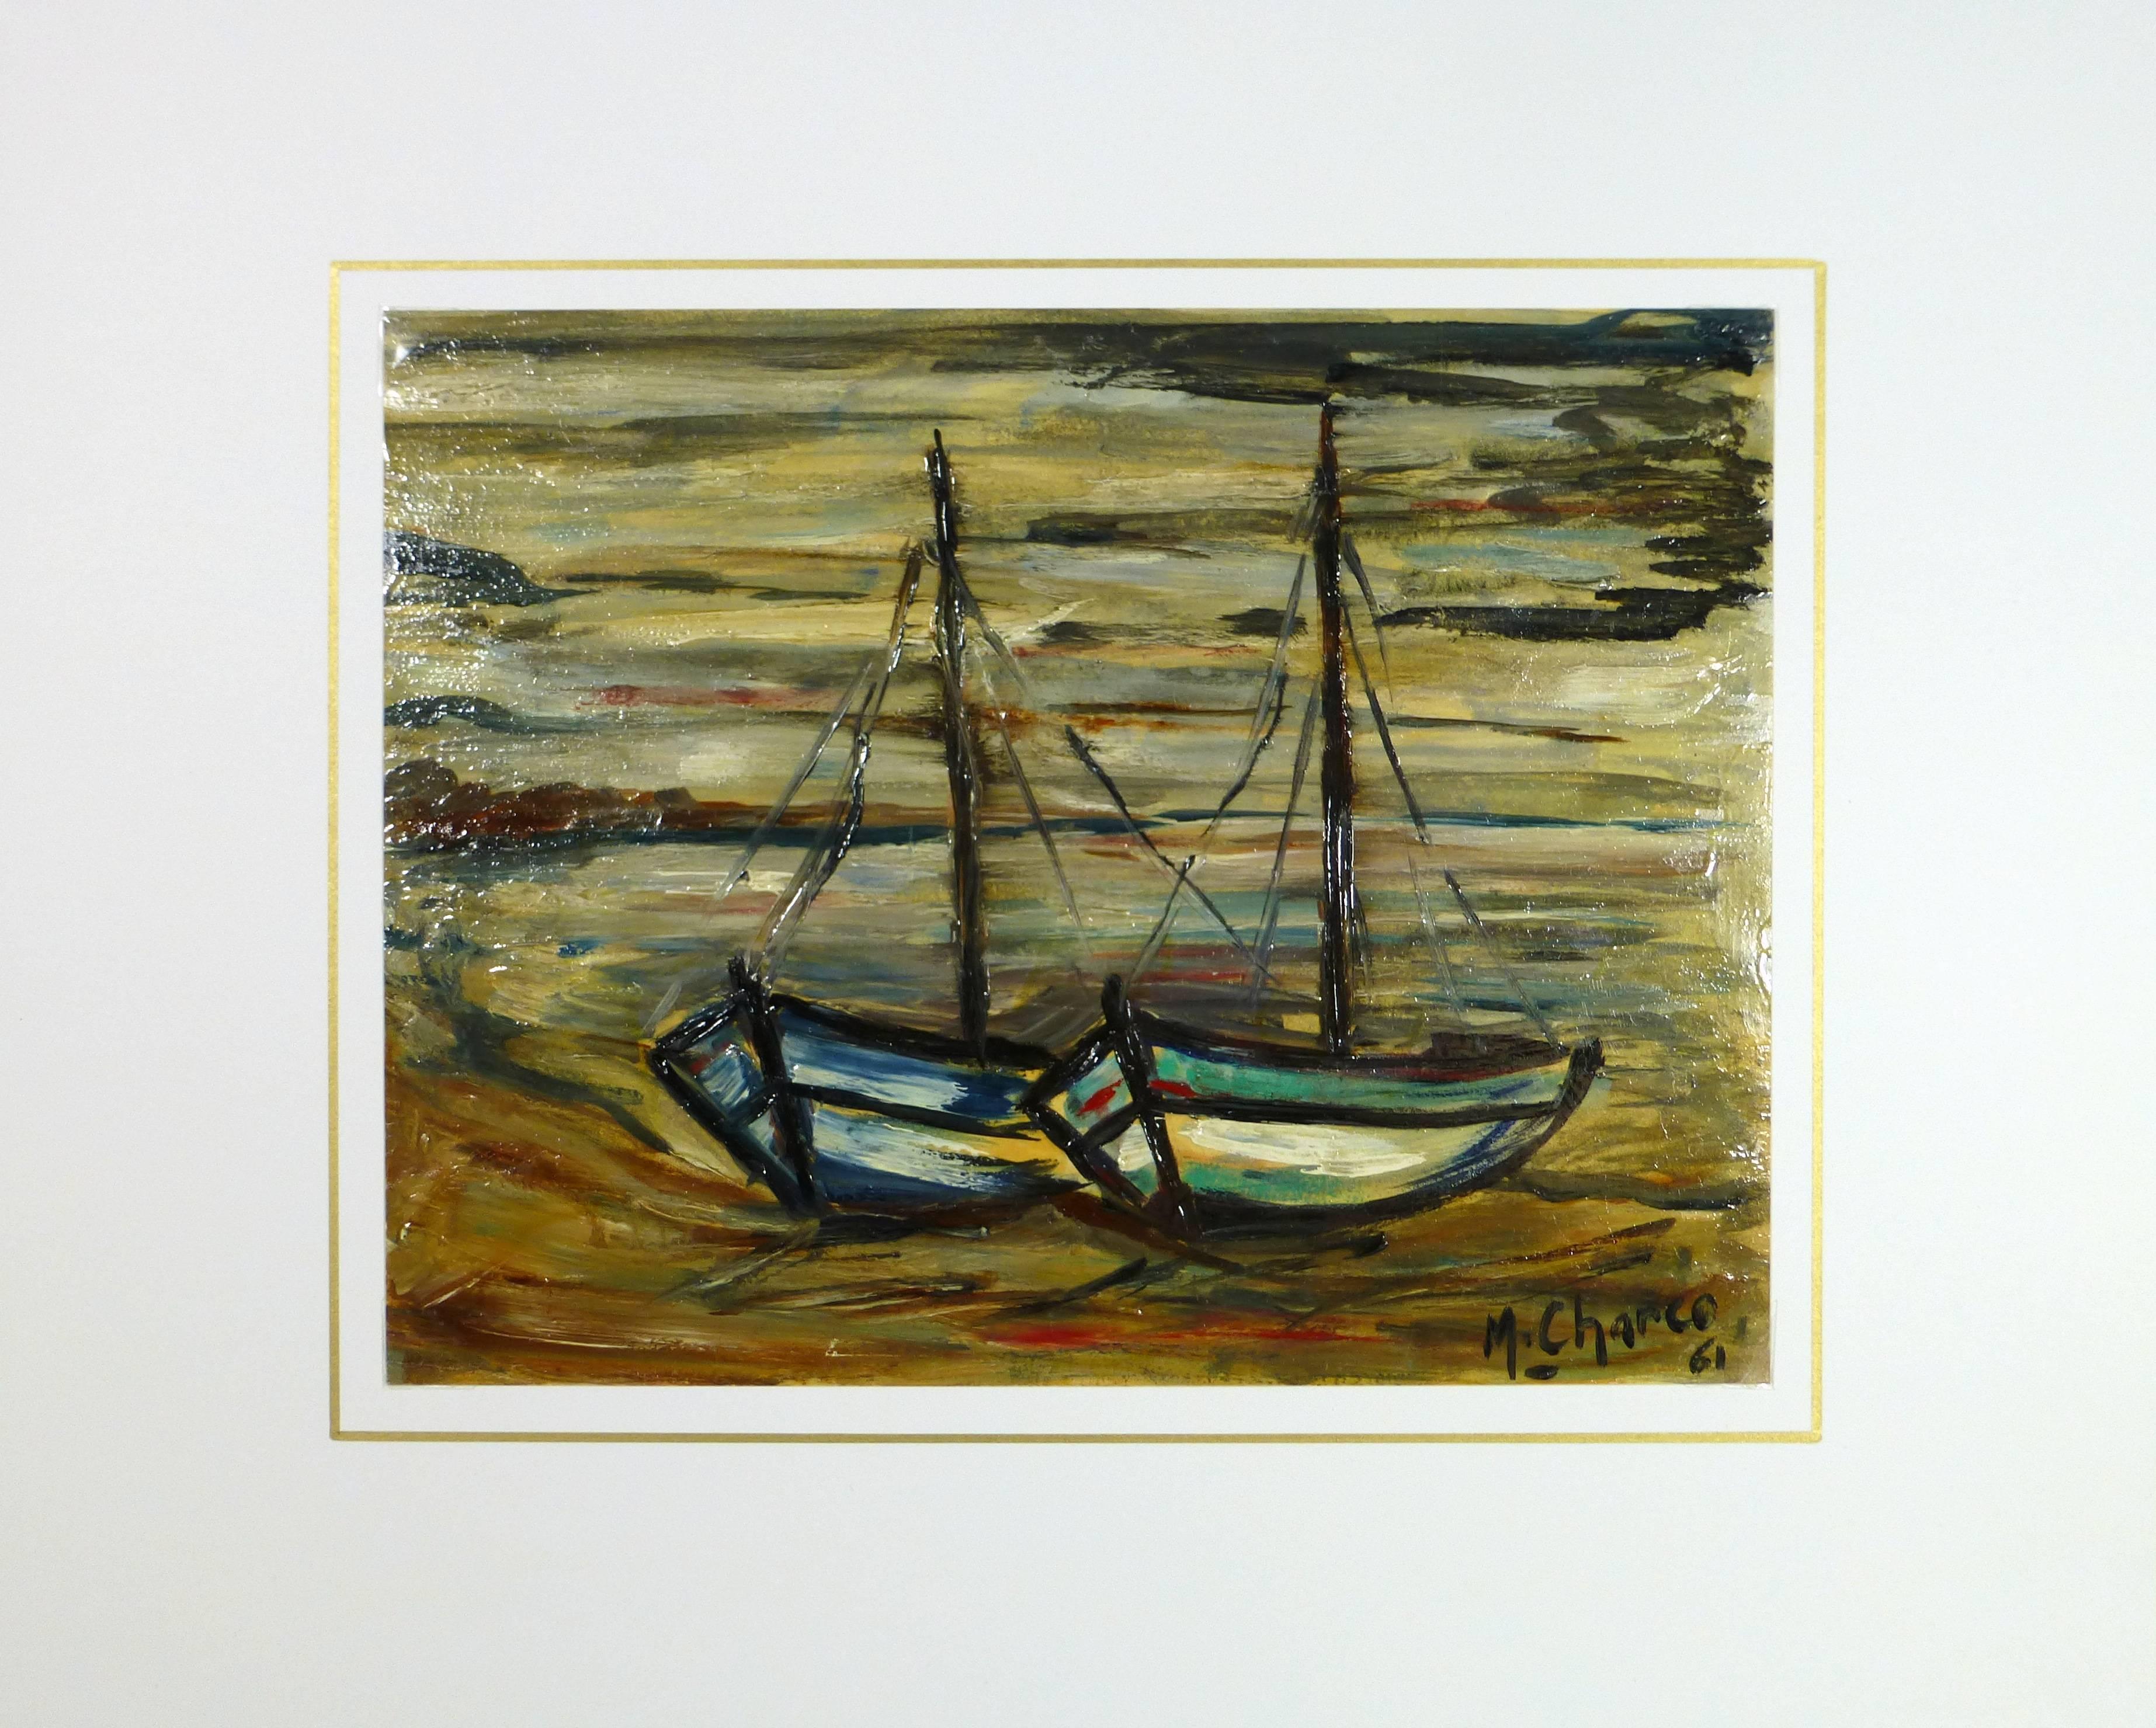 Striking mid-century painting of pair of sailboats by French artist M. Charco, 1961.  Signed by artist lower right.  

Original artwork on paper displayed on a white mat with a gold border. Archival plastic sleeve and Certificate of Authenticity